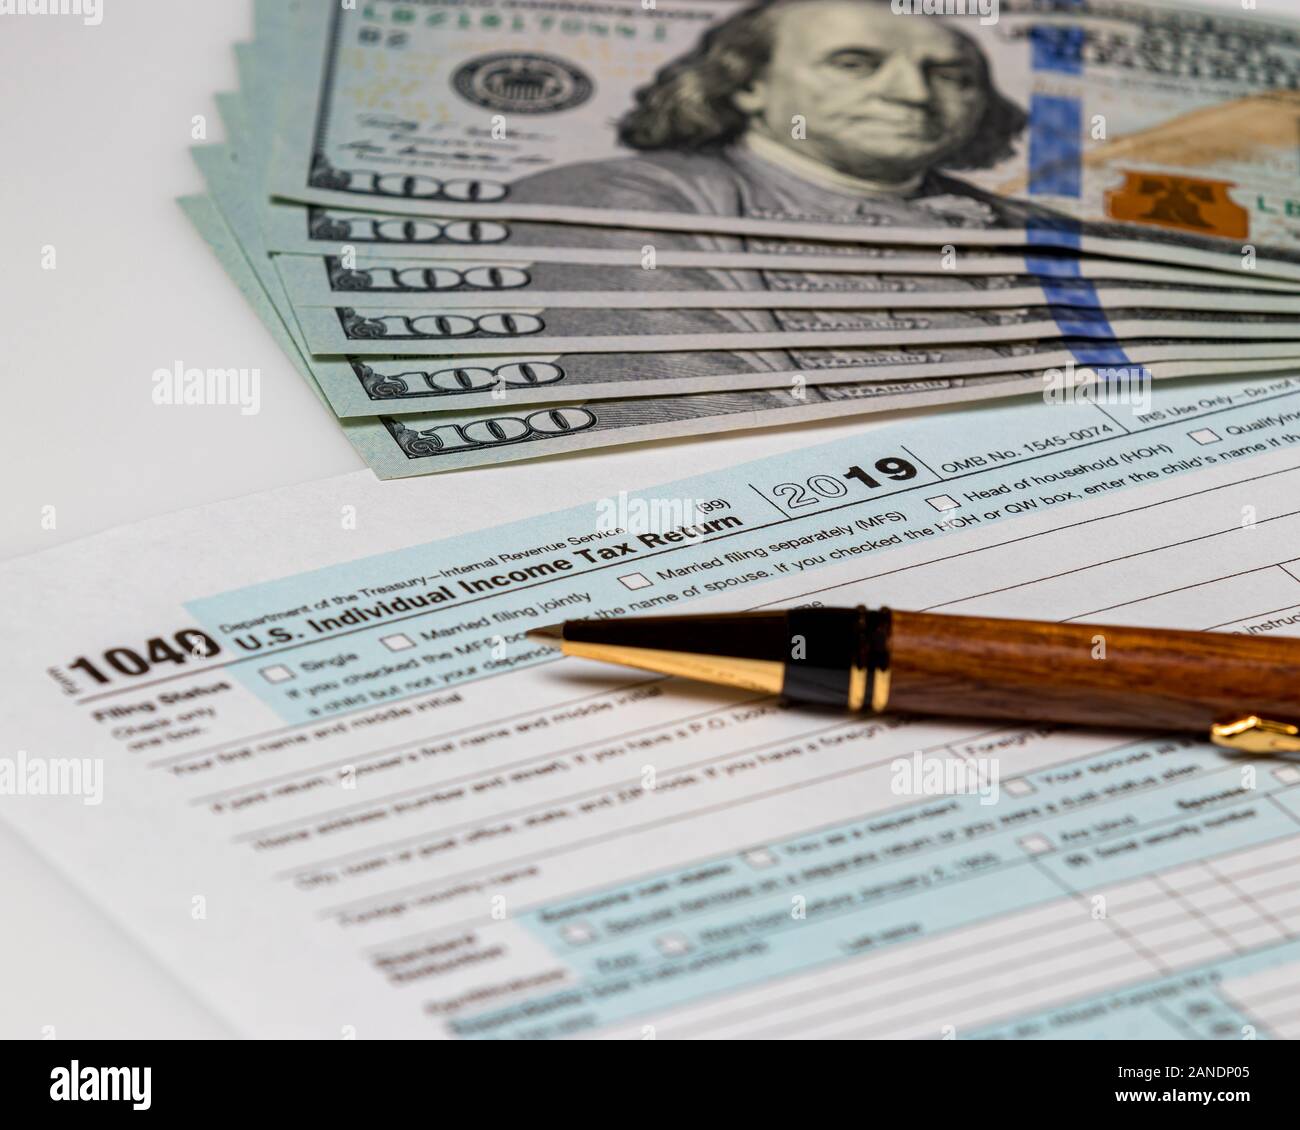 1040 individual income tax return form 2019 with pen and 100 dollar bills. Concept of filing taxes, payment, refund, and April 15,2020 deadline date. Stock Photo